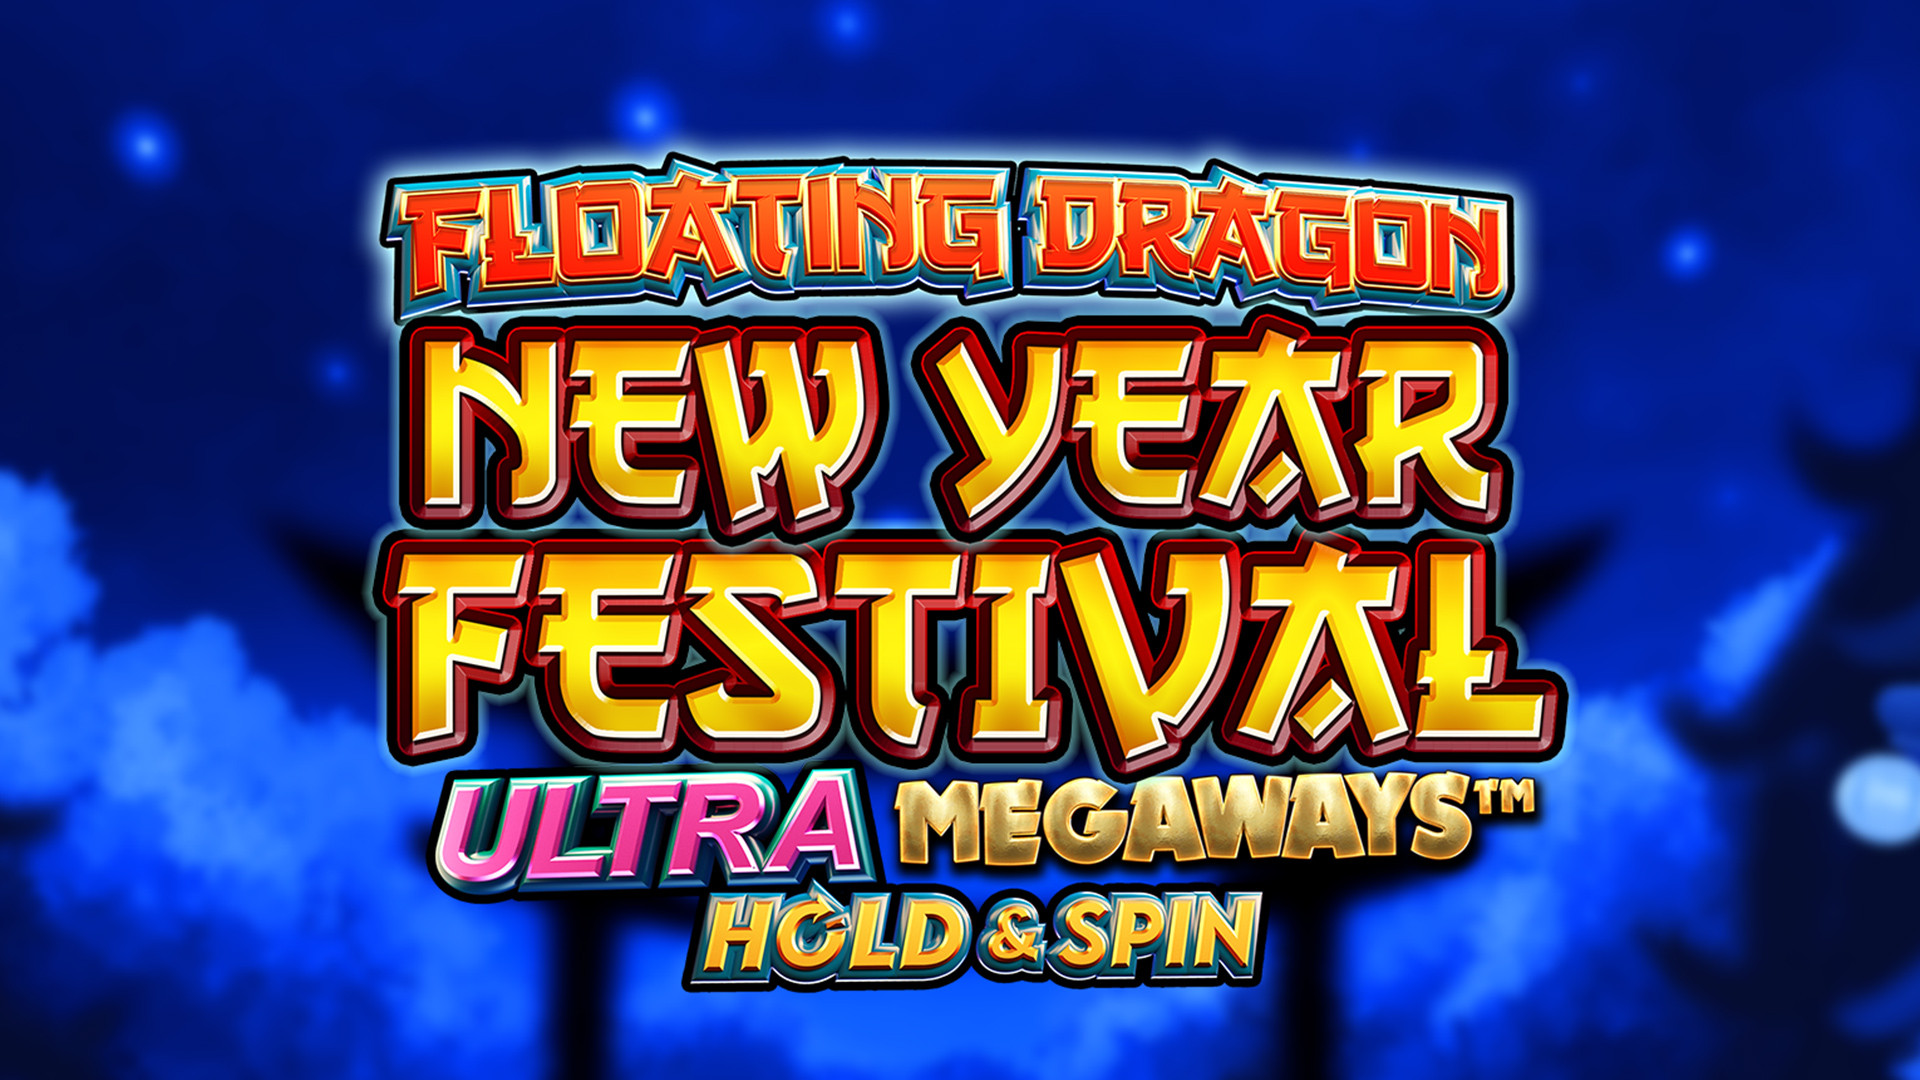 Floating Dragon New Year Festival Ultra MEGAWAYS Hold & Spin